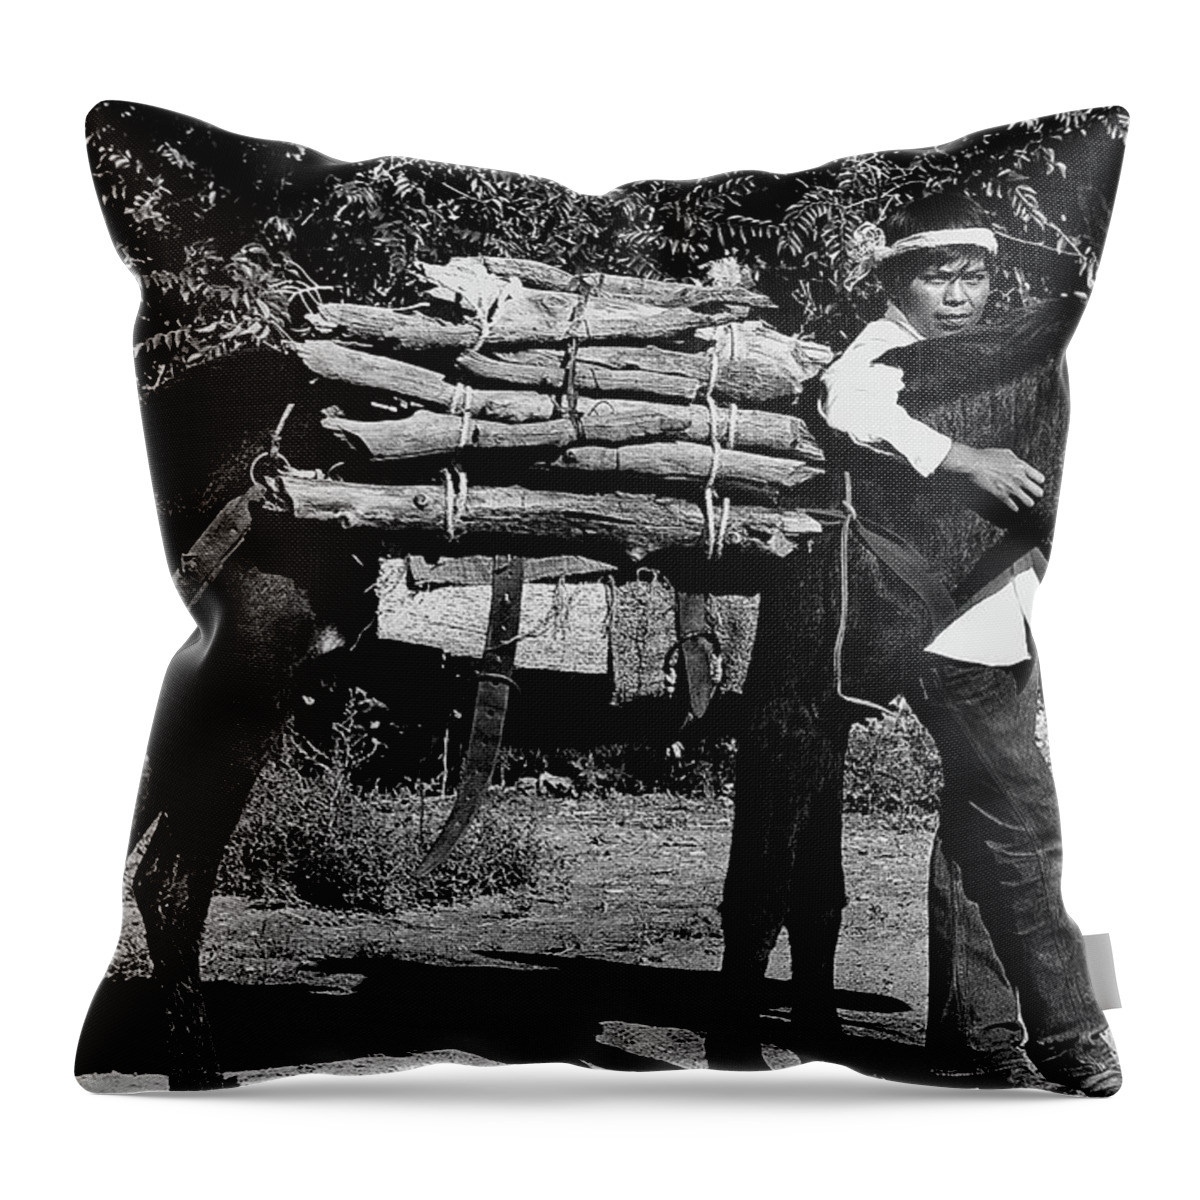 Navajo Boy Donkey Carrying Wood Inter-tribal Indian Rodeo Gallup New Mexico 1969. Throw Pillow featuring the photograph Navajo Boy Donkey Carrying Wood Inter-tribal Indian Rodeo Gallup New Mexico 1969. #4 by David Lee Guss